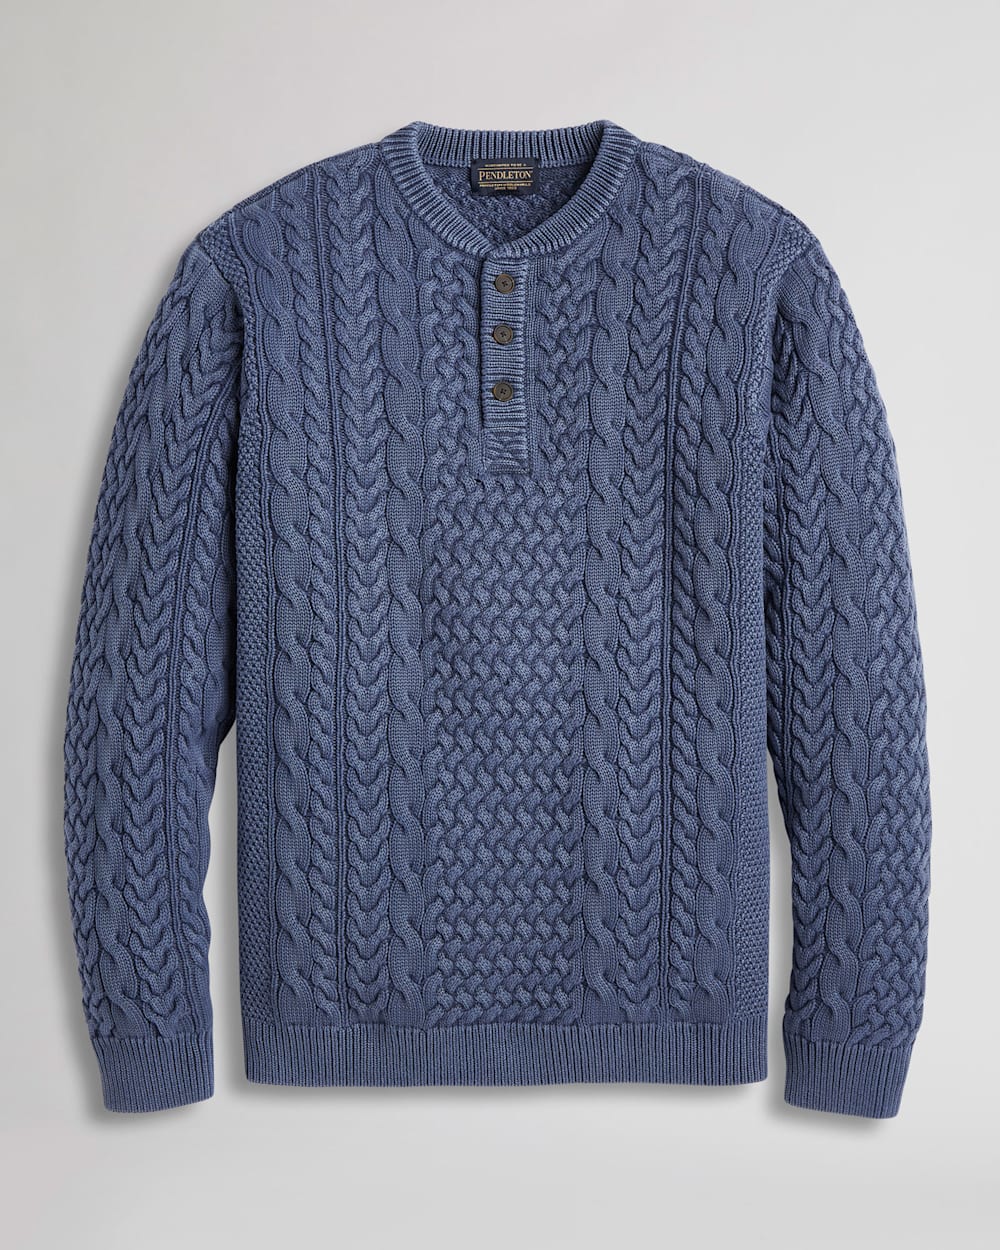 ALTERNATE VIEW OF MEN'S COTTON CABLE HENLEY SWEATER IN DARK DENIM image number 6